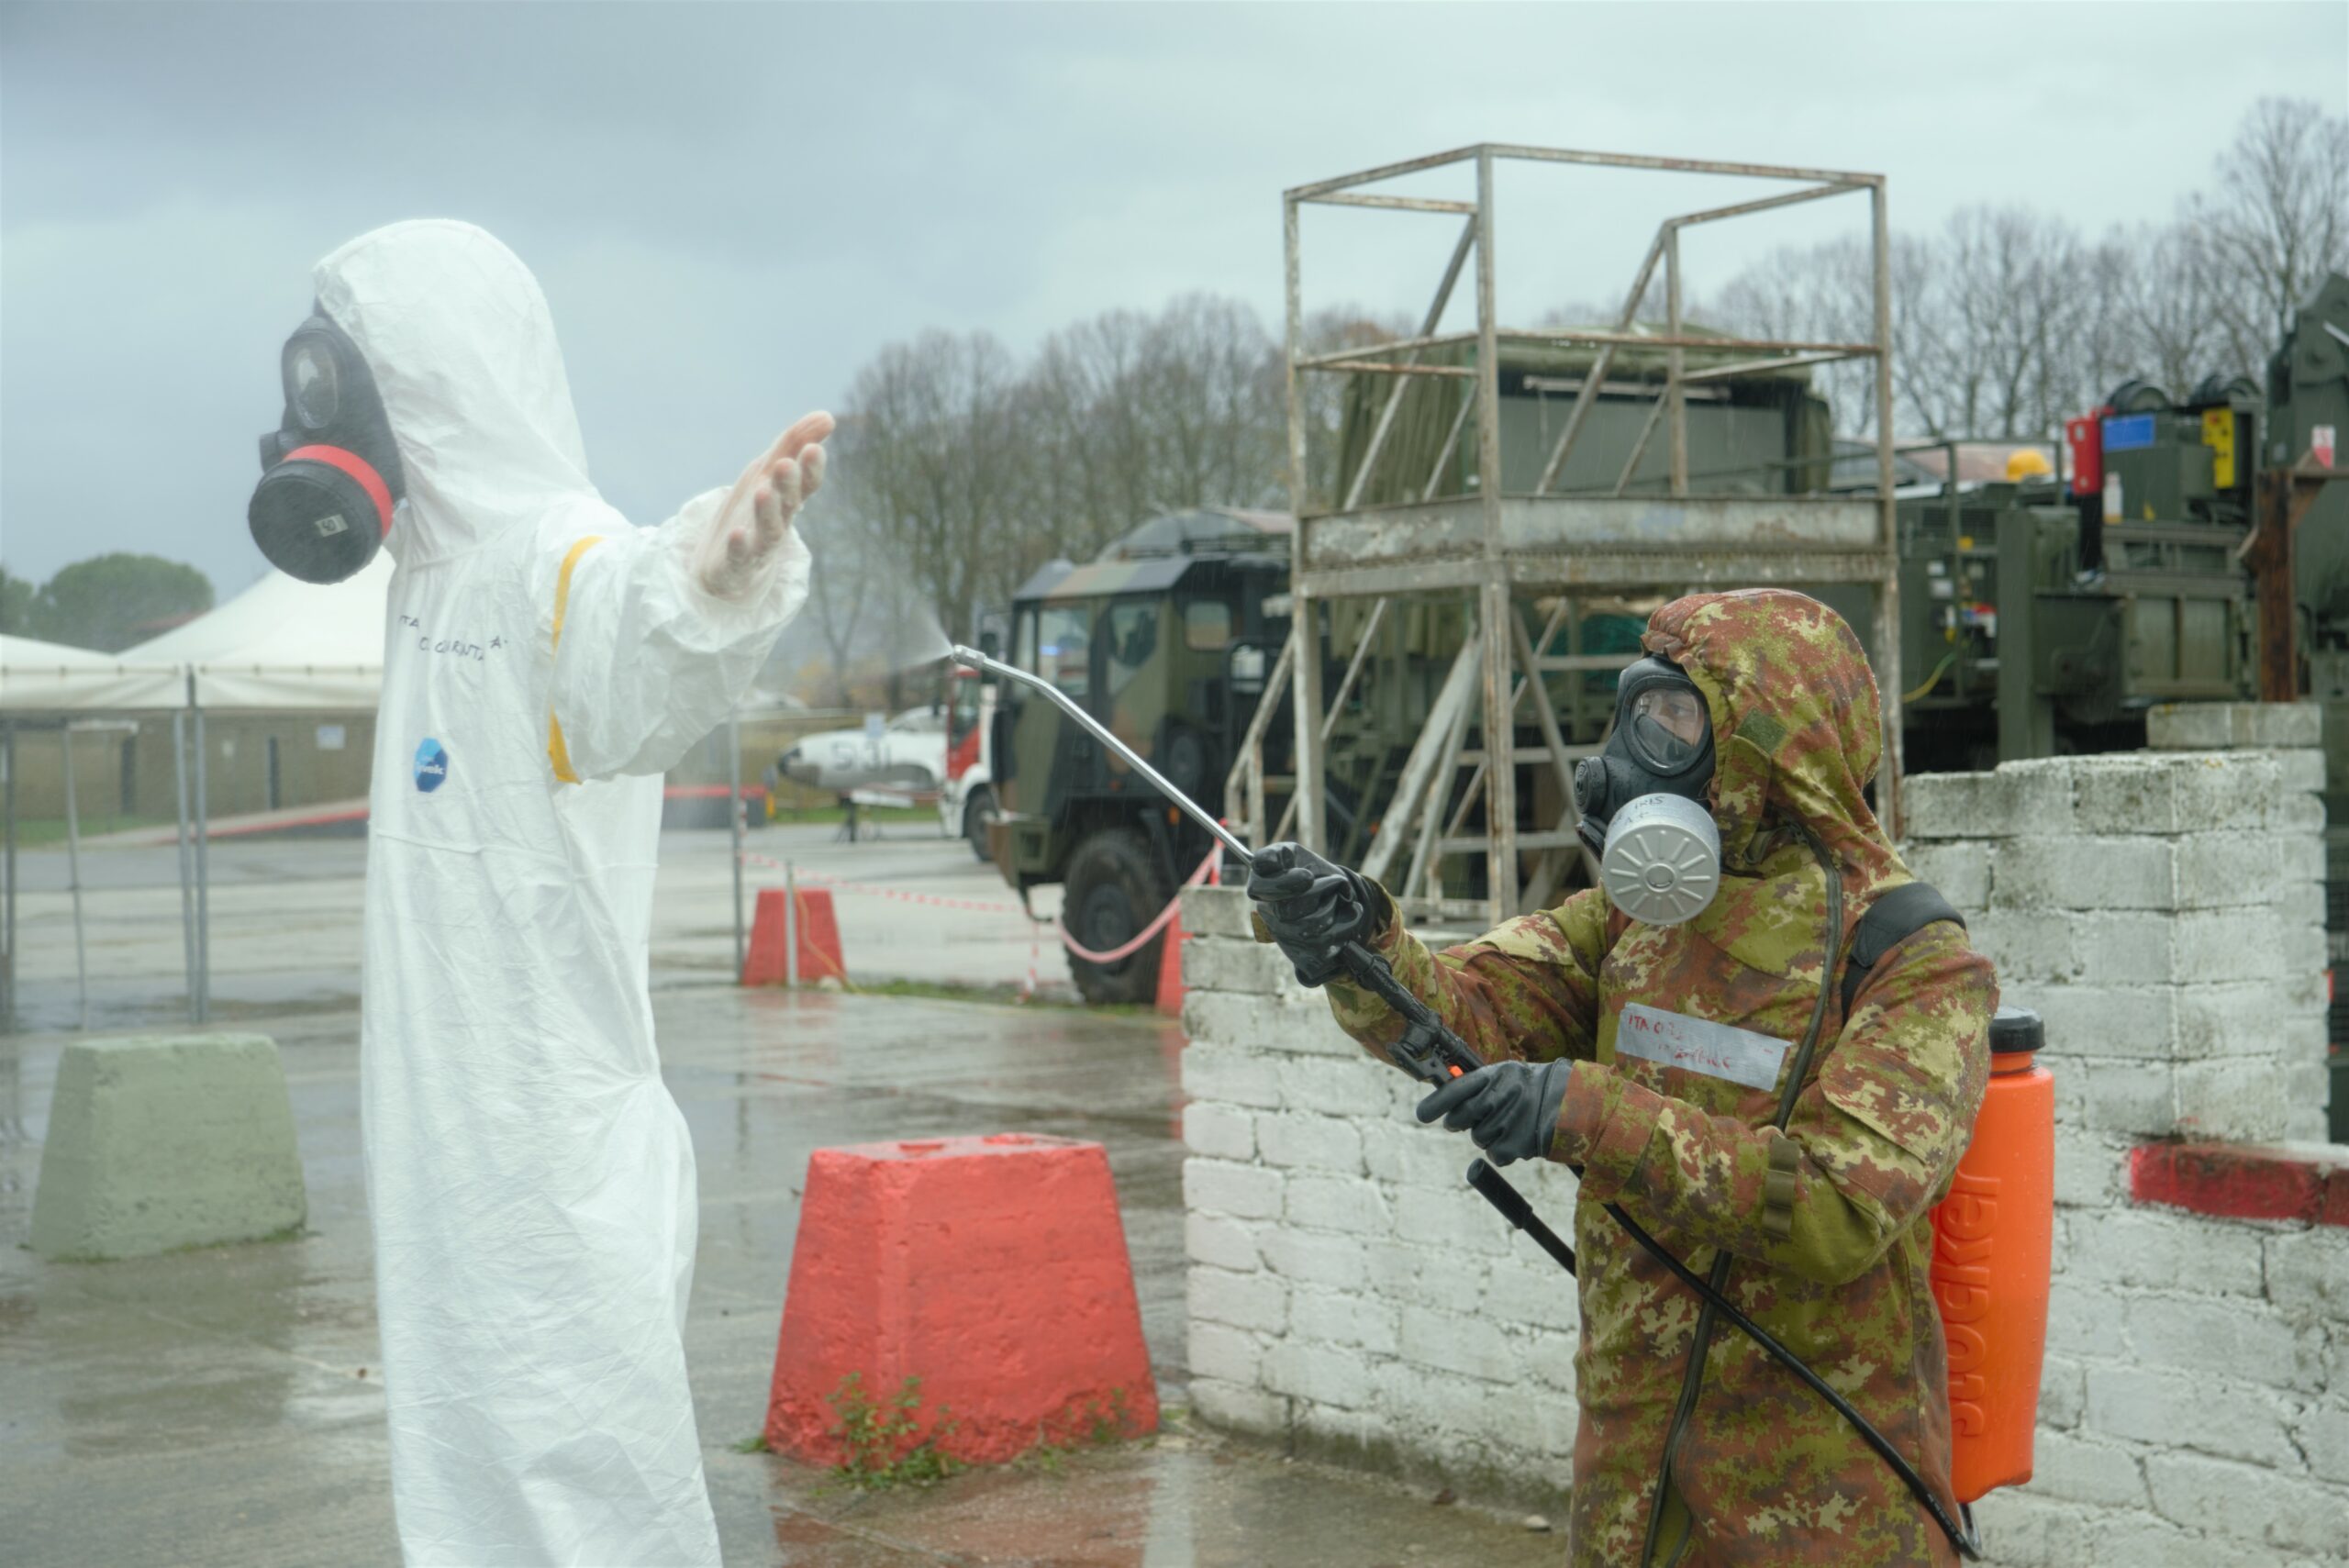 A CBRN Defence Specialist Units from the Army is decontaminating a first responder with water who is wearing a hazmat suit. 